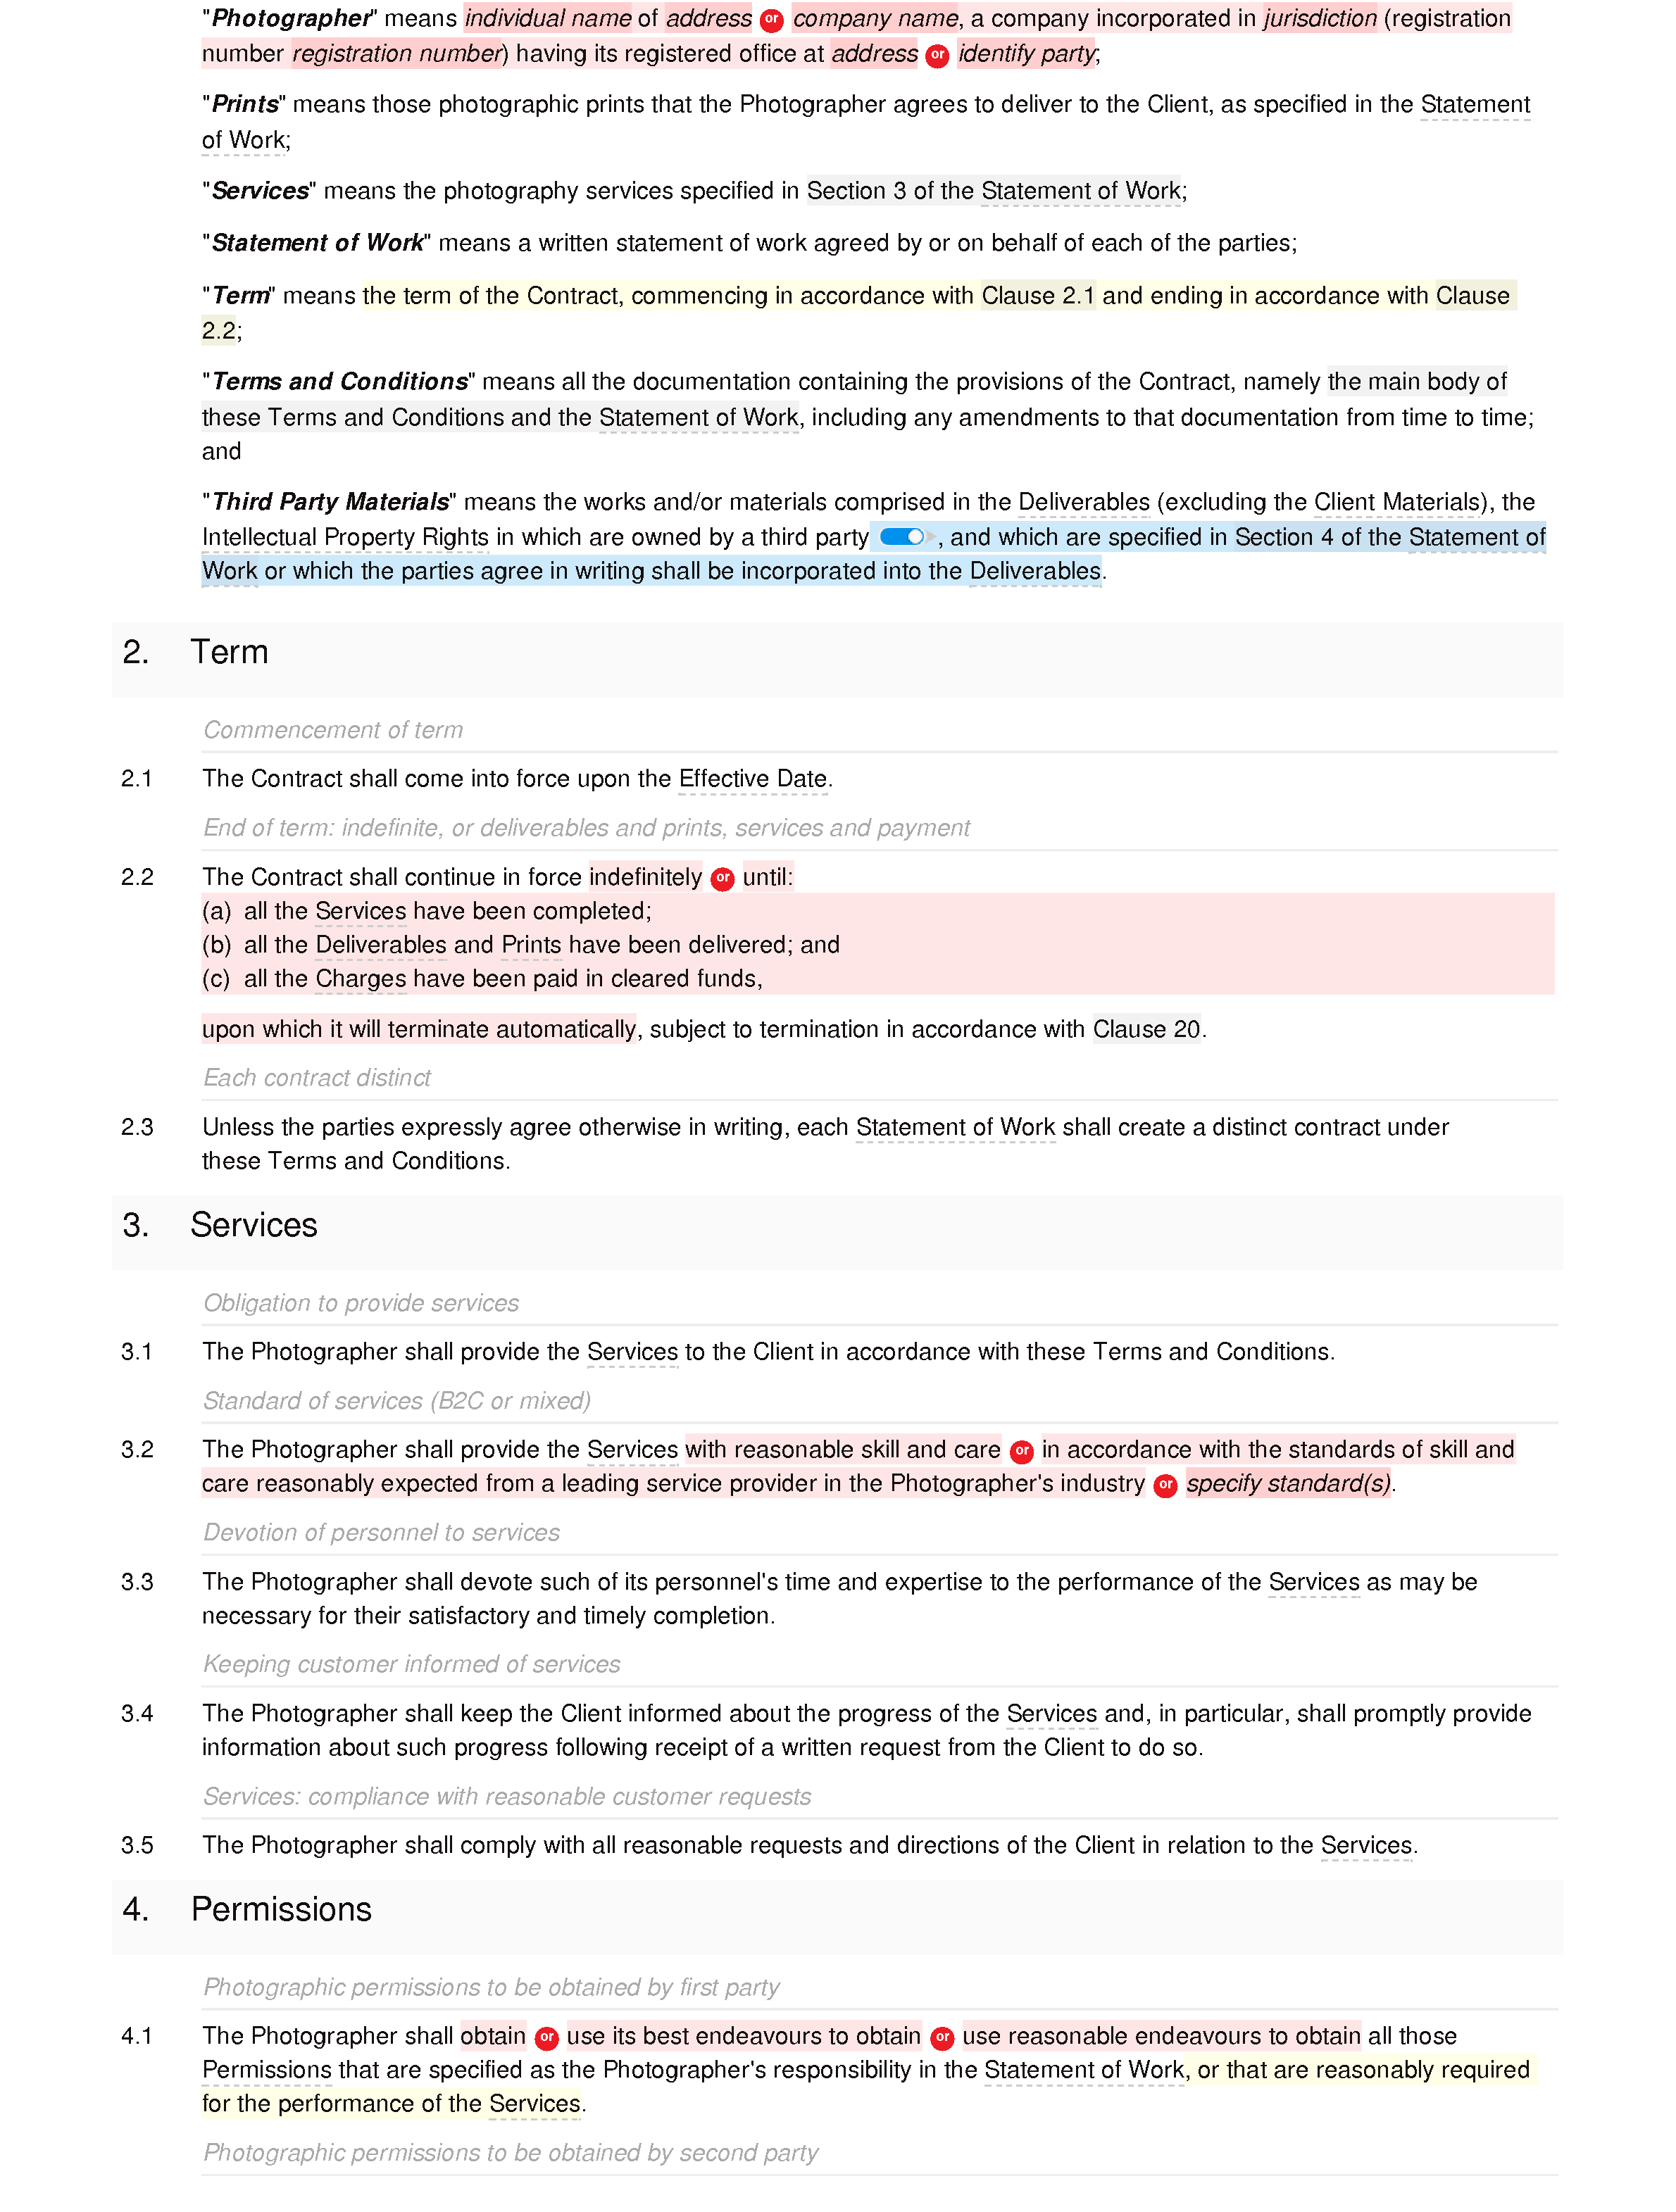 Wedding photography terms and conditions document editor preview